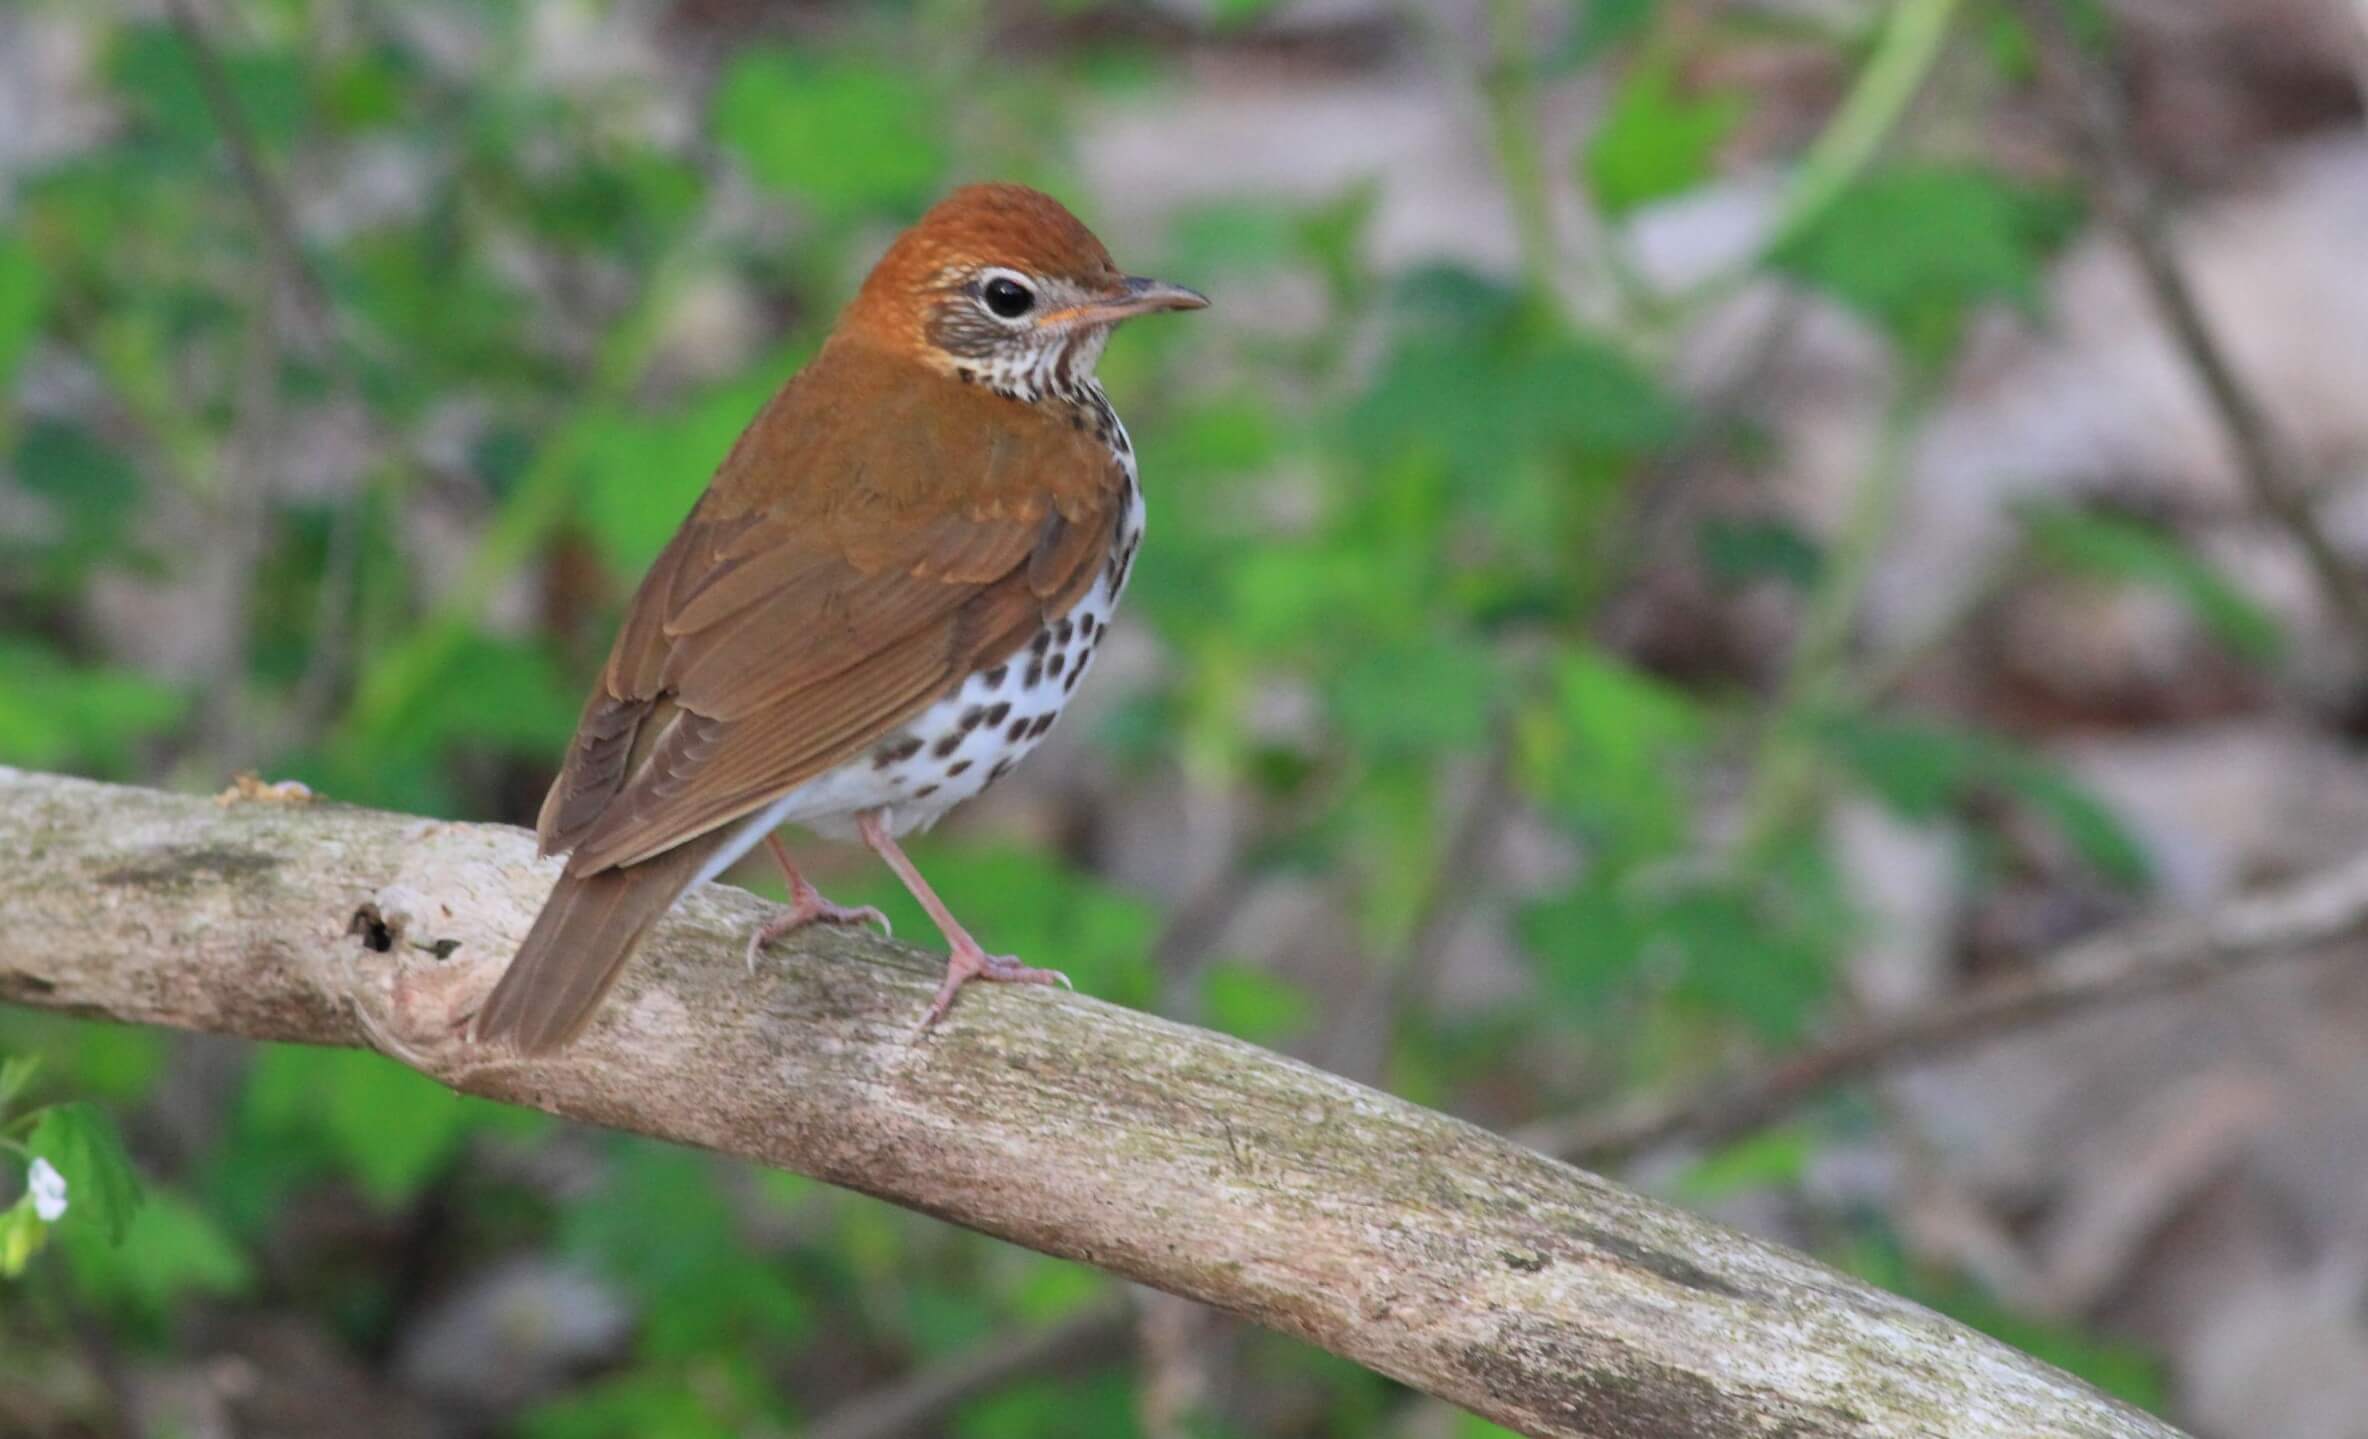 Resident Wood Thrushes filled Tennessee's Meeman-Shelby Forest State Park on the eastern bank of the Mississippi River. Photo by Bruce Beehler